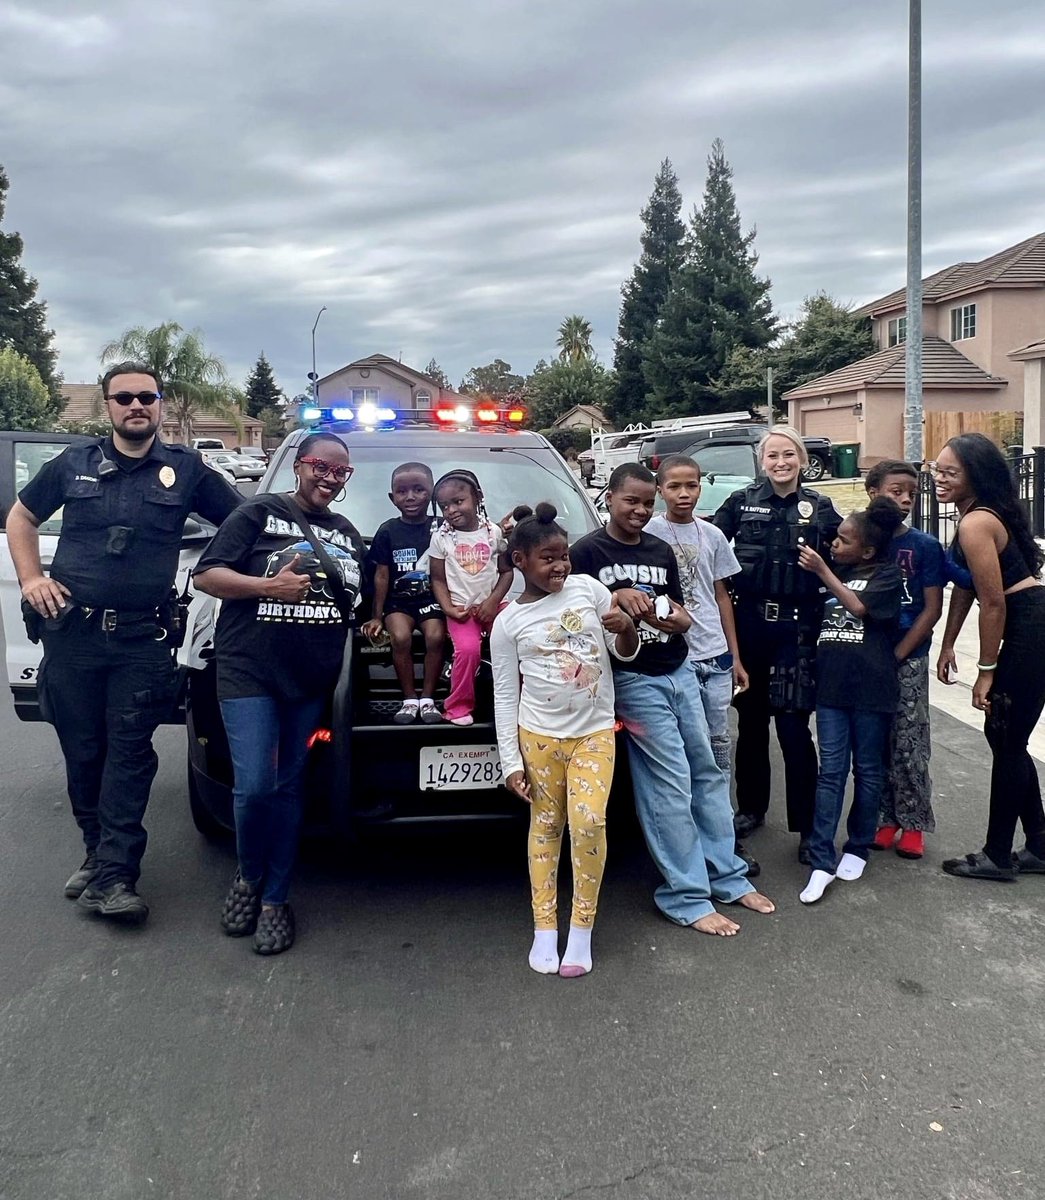 Over the weekend, Officer Rafferty and Officer Sandrio stopped by Royce's birthday party and wished him a Happy 4th Birthday! #cops4communities #birthdaycew